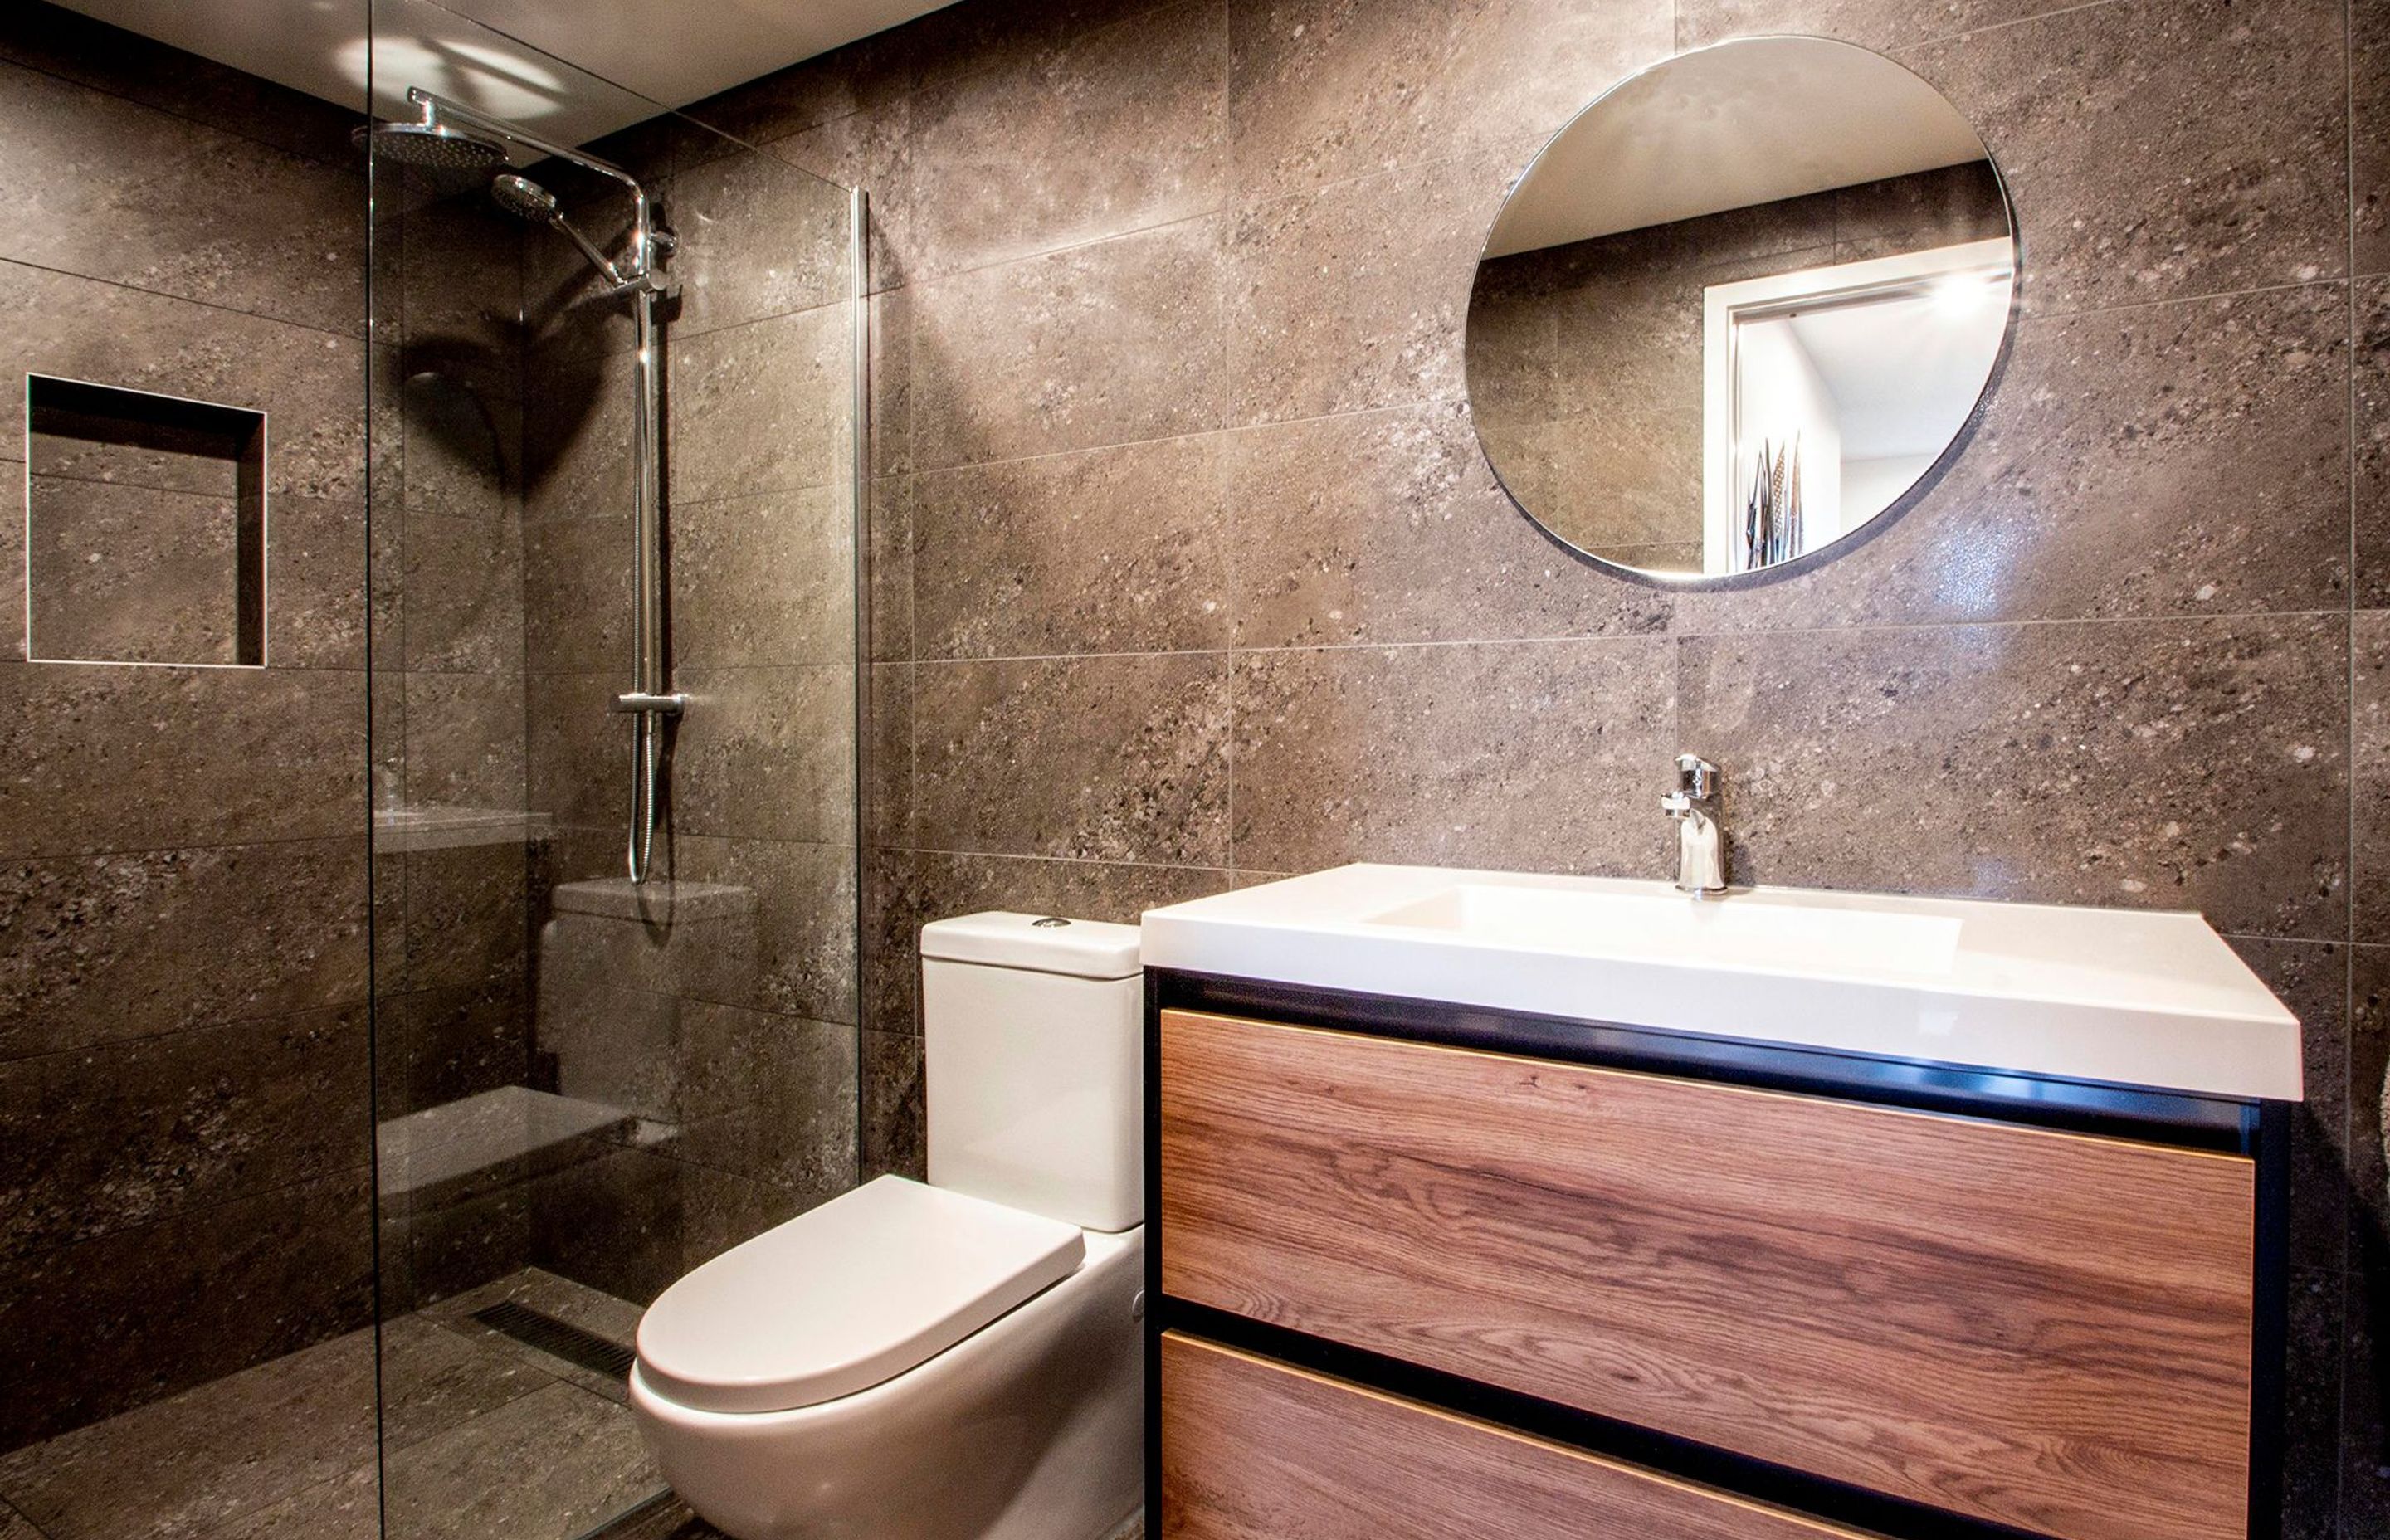 One of the bathrooms utilises natural materials.